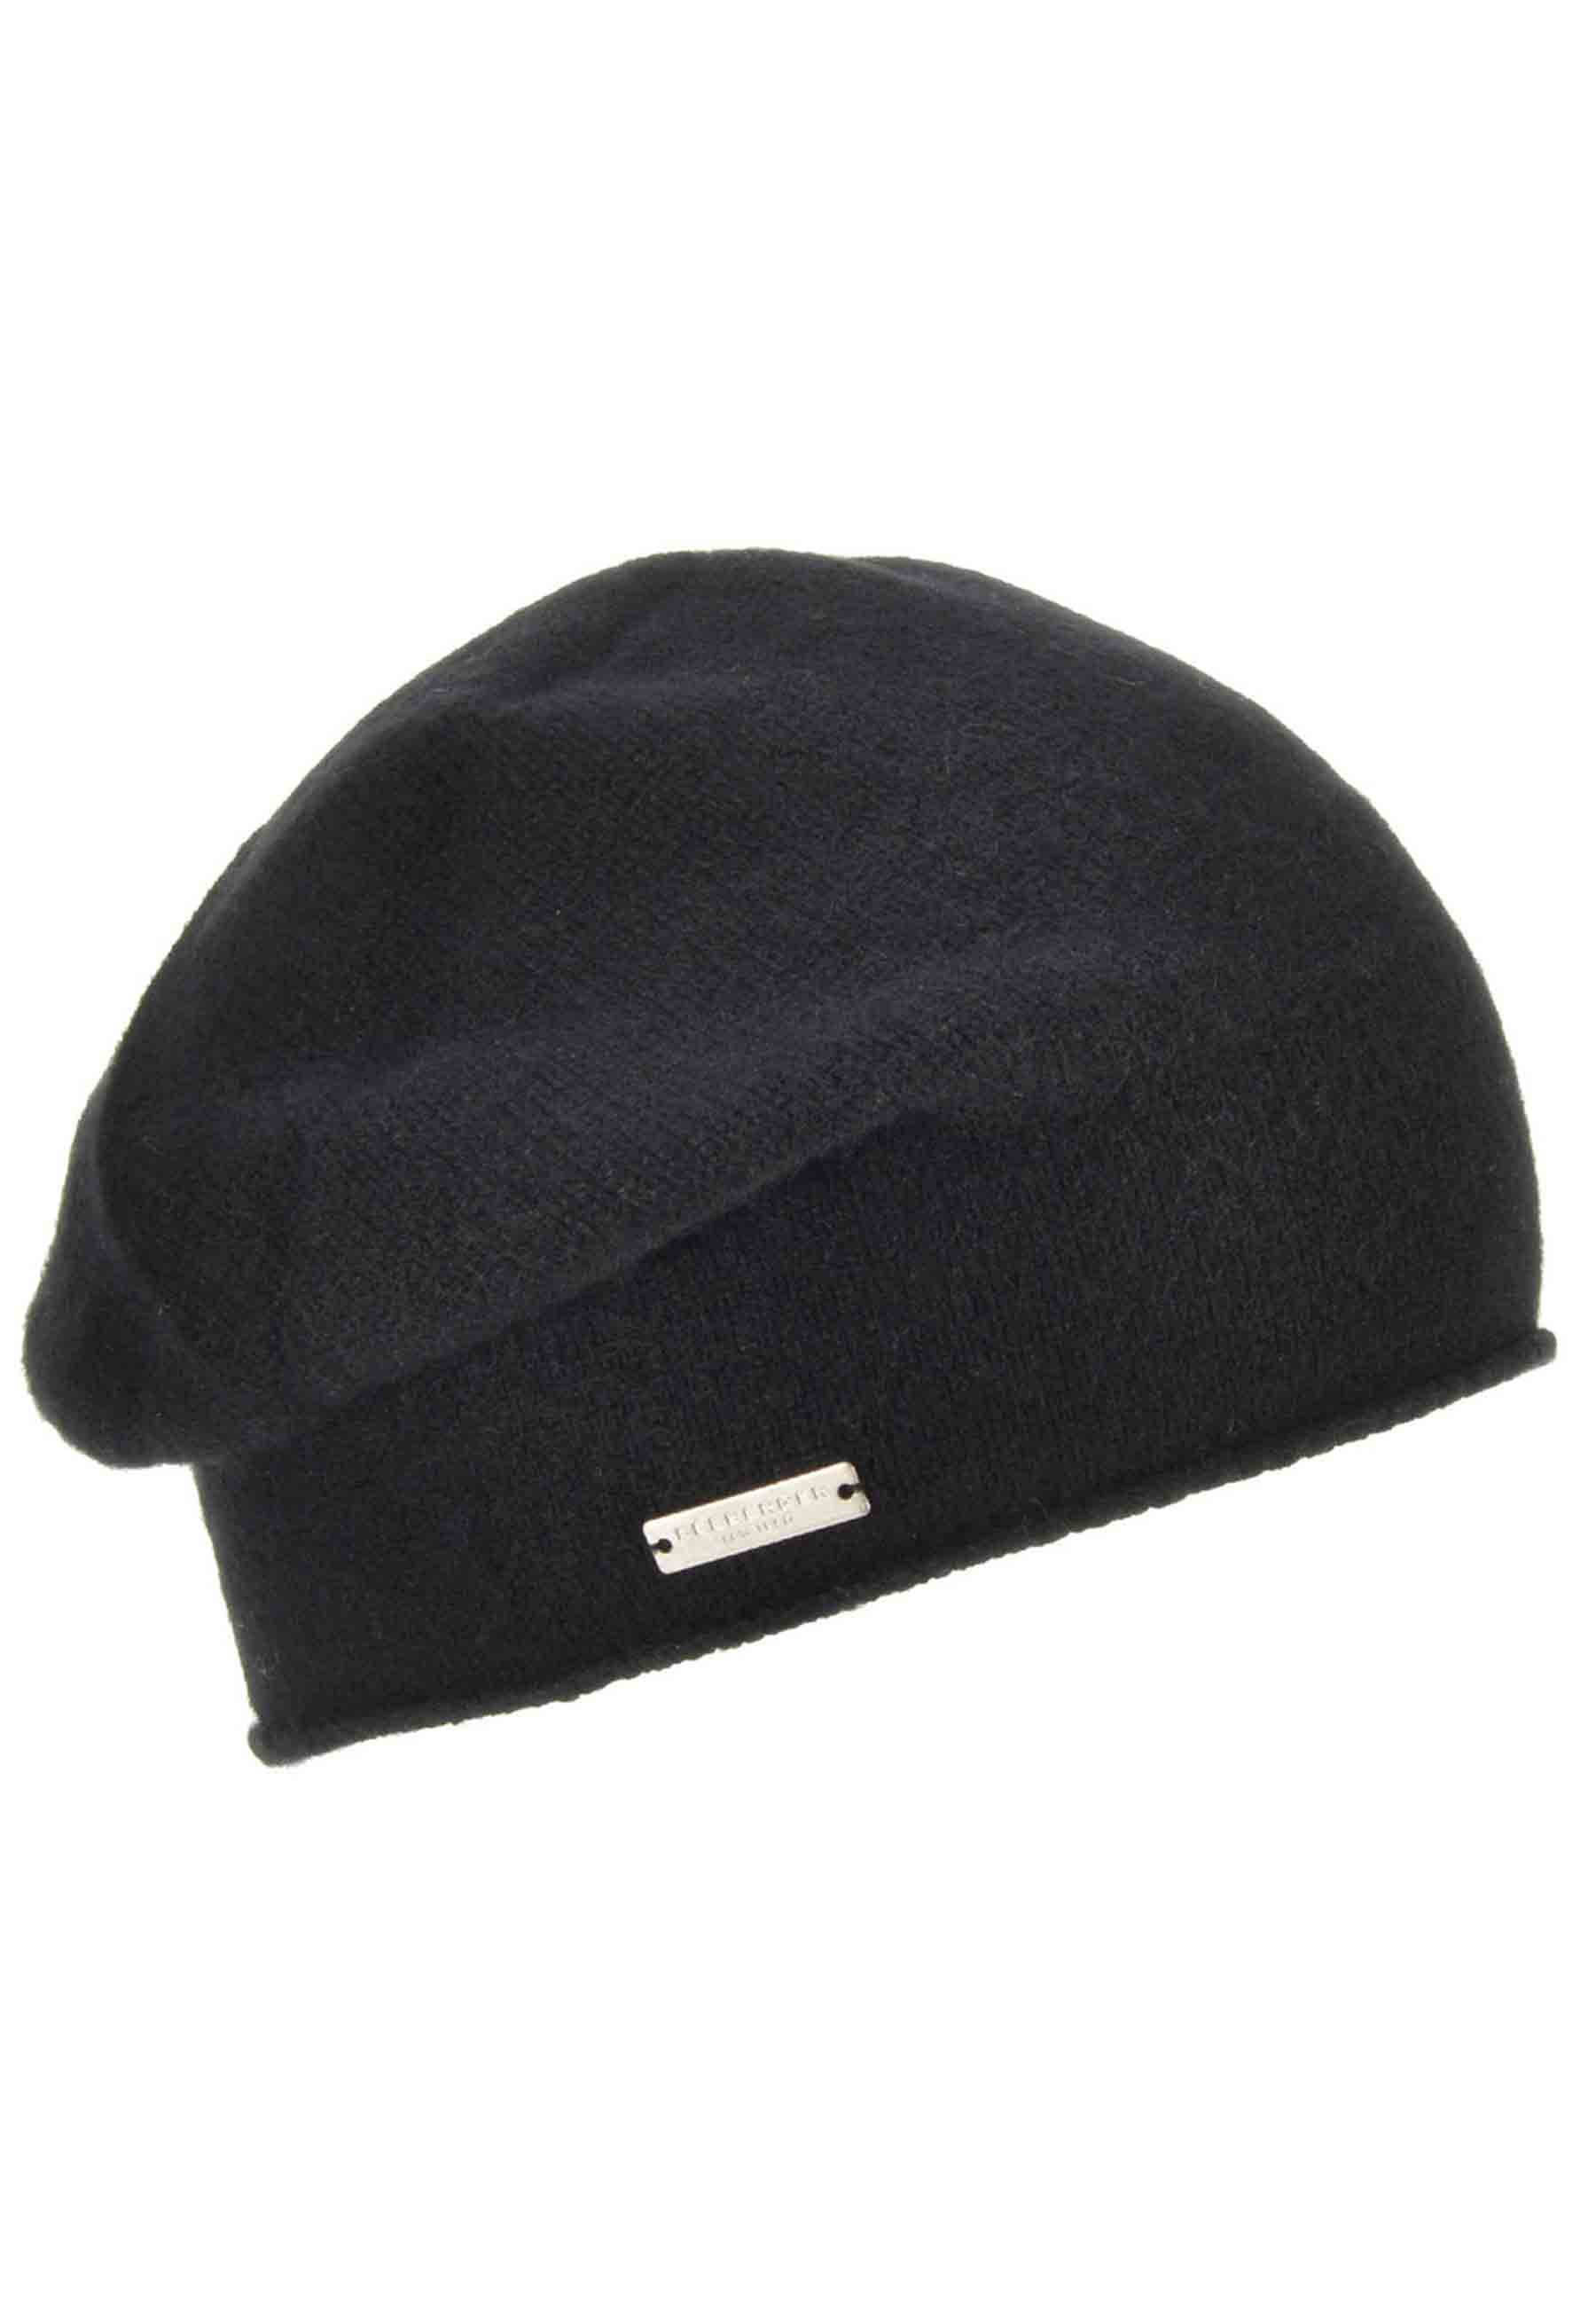 Women's black cashmere beanie with rolled edge